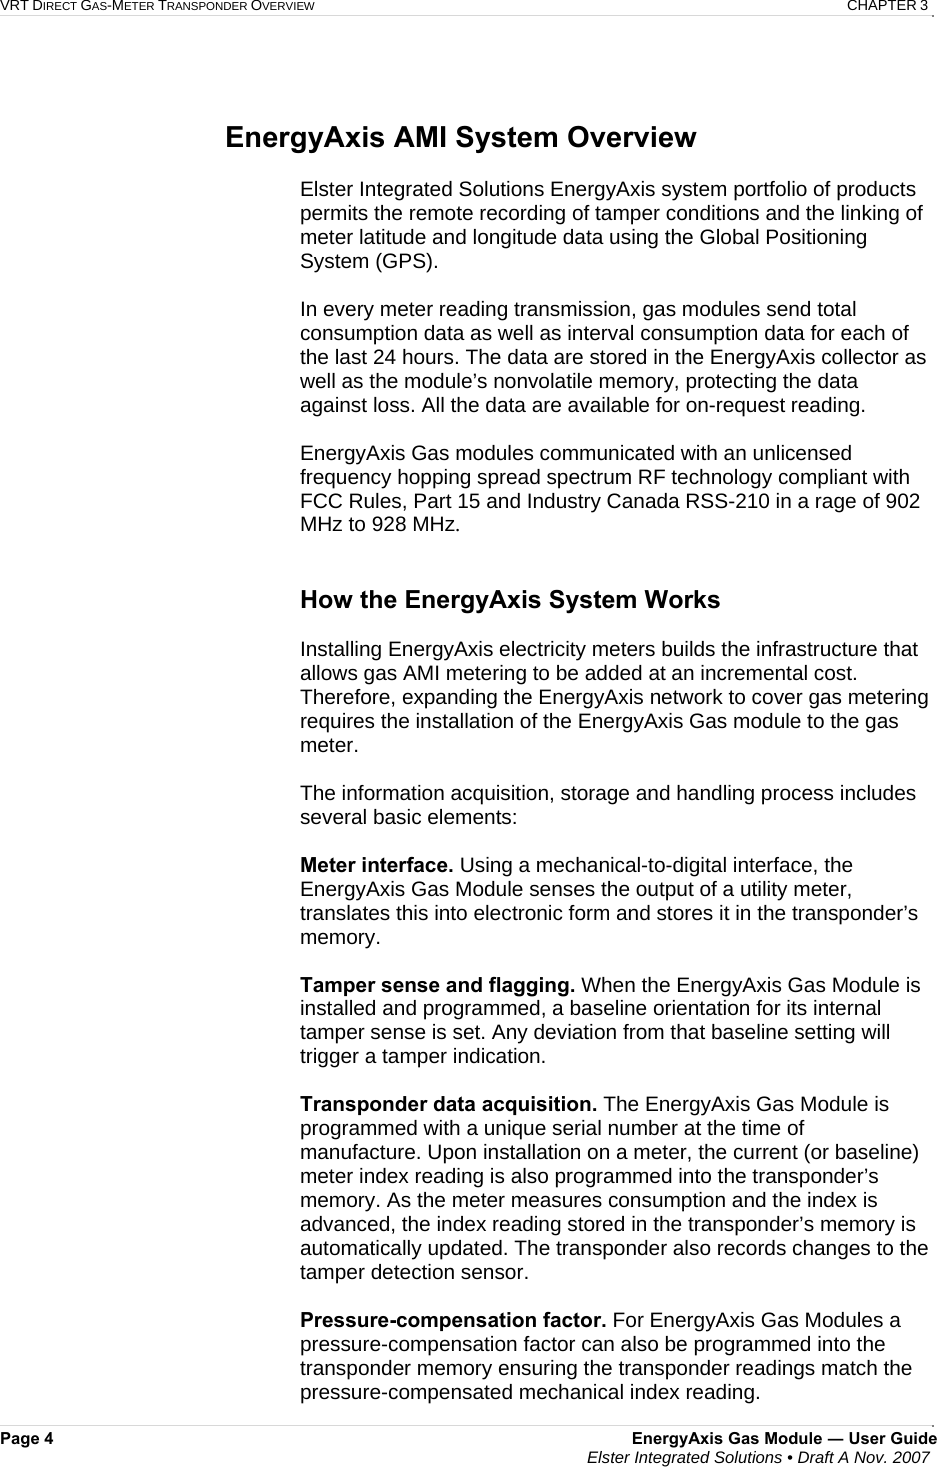 VRT DIRECT GAS-METER TRANSPONDER OVERVIEW   CHAPTER 3 Page 4  EnergyAxis Gas Module ― User Guide  Elster Integrated Solutions • Draft A Nov. 2007    EnergyAxis AMI System Overview  Elster Integrated Solutions EnergyAxis system portfolio of products permits the remote recording of tamper conditions and the linking of meter latitude and longitude data using the Global Positioning System (GPS).   In every meter reading transmission, gas modules send total consumption data as well as interval consumption data for each of the last 24 hours. The data are stored in the EnergyAxis collector as well as the module’s nonvolatile memory, protecting the data against loss. All the data are available for on-request reading.  EnergyAxis Gas modules communicated with an unlicensed frequency hopping spread spectrum RF technology compliant with FCC Rules, Part 15 and Industry Canada RSS-210 in a rage of 902 MHz to 928 MHz.    How the EnergyAxis System Works  Installing EnergyAxis electricity meters builds the infrastructure that allows gas AMI metering to be added at an incremental cost.   Therefore, expanding the EnergyAxis network to cover gas metering requires the installation of the EnergyAxis Gas module to the gas meter.  The information acquisition, storage and handling process includes several basic elements:  Meter interface. Using a mechanical-to-digital interface, the EnergyAxis Gas Module senses the output of a utility meter, translates this into electronic form and stores it in the transponder’s memory.  Tamper sense and flagging. When the EnergyAxis Gas Module is installed and programmed, a baseline orientation for its internal tamper sense is set. Any deviation from that baseline setting will trigger a tamper indication.  Transponder data acquisition. The EnergyAxis Gas Module is programmed with a unique serial number at the time of manufacture. Upon installation on a meter, the current (or baseline) meter index reading is also programmed into the transponder’s memory. As the meter measures consumption and the index is advanced, the index reading stored in the transponder’s memory is automatically updated. The transponder also records changes to the tamper detection sensor.   Pressure-compensation factor. For EnergyAxis Gas Modules a pressure-compensation factor can also be programmed into the transponder memory ensuring the transponder readings match the pressure-compensated mechanical index reading.  